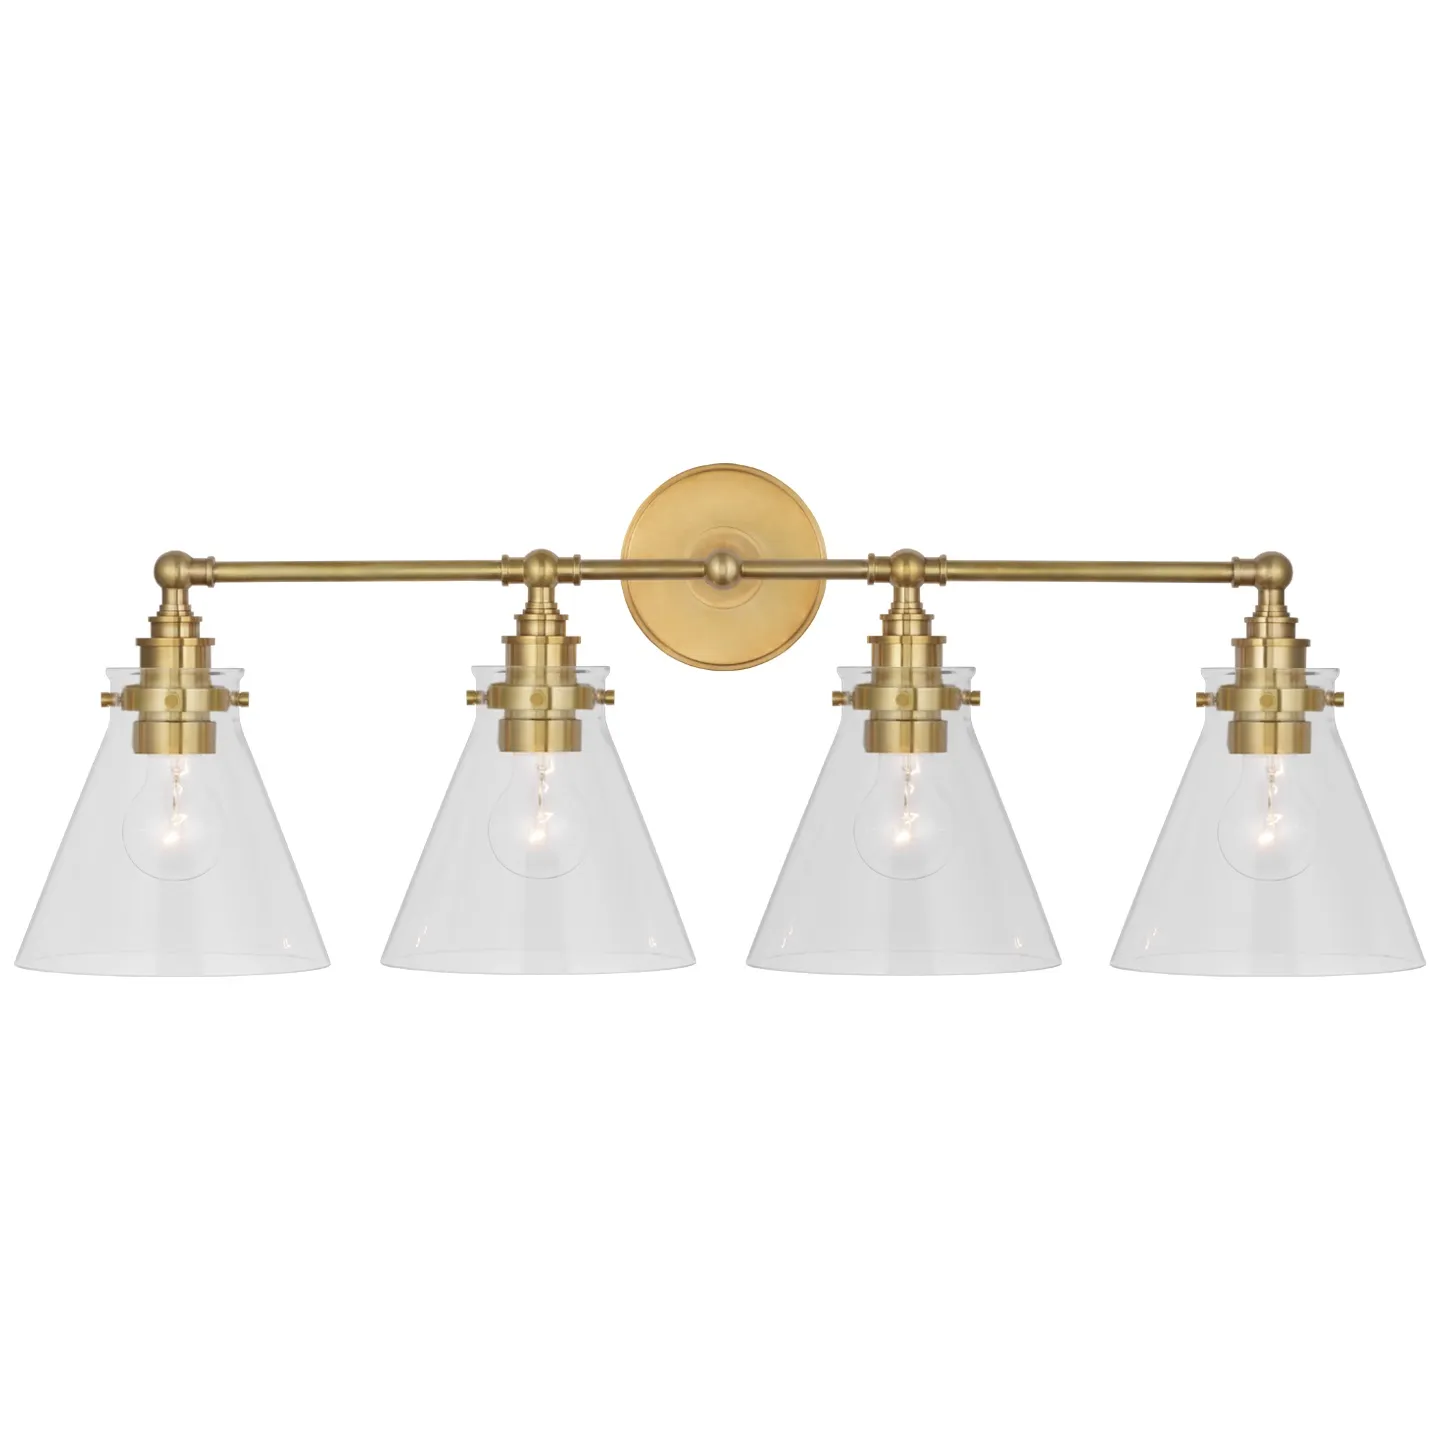 Parkington 32" Four Light Bath Bar in Antique-Burnished Brass with Clear Glass